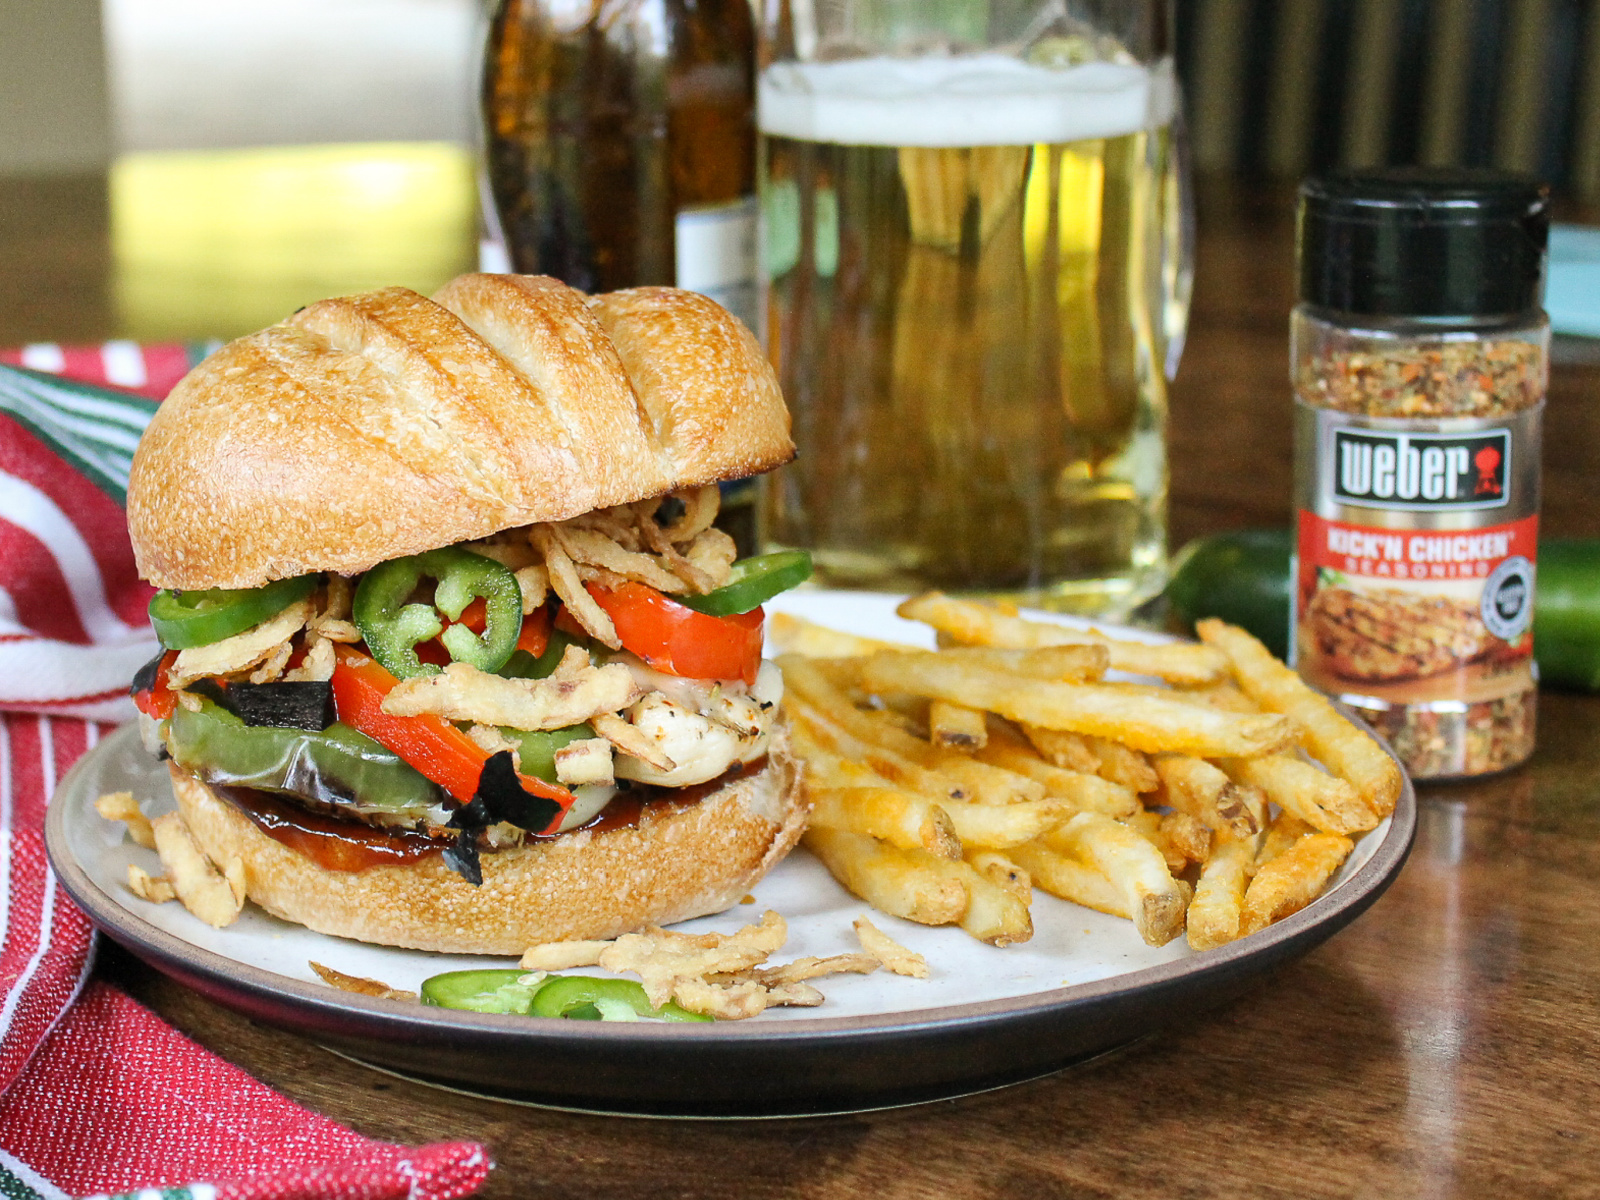 Spice Up Your Meals With Weber Seasoning - Try My Kick’n Chicken Sandwich! on I Heart Publix